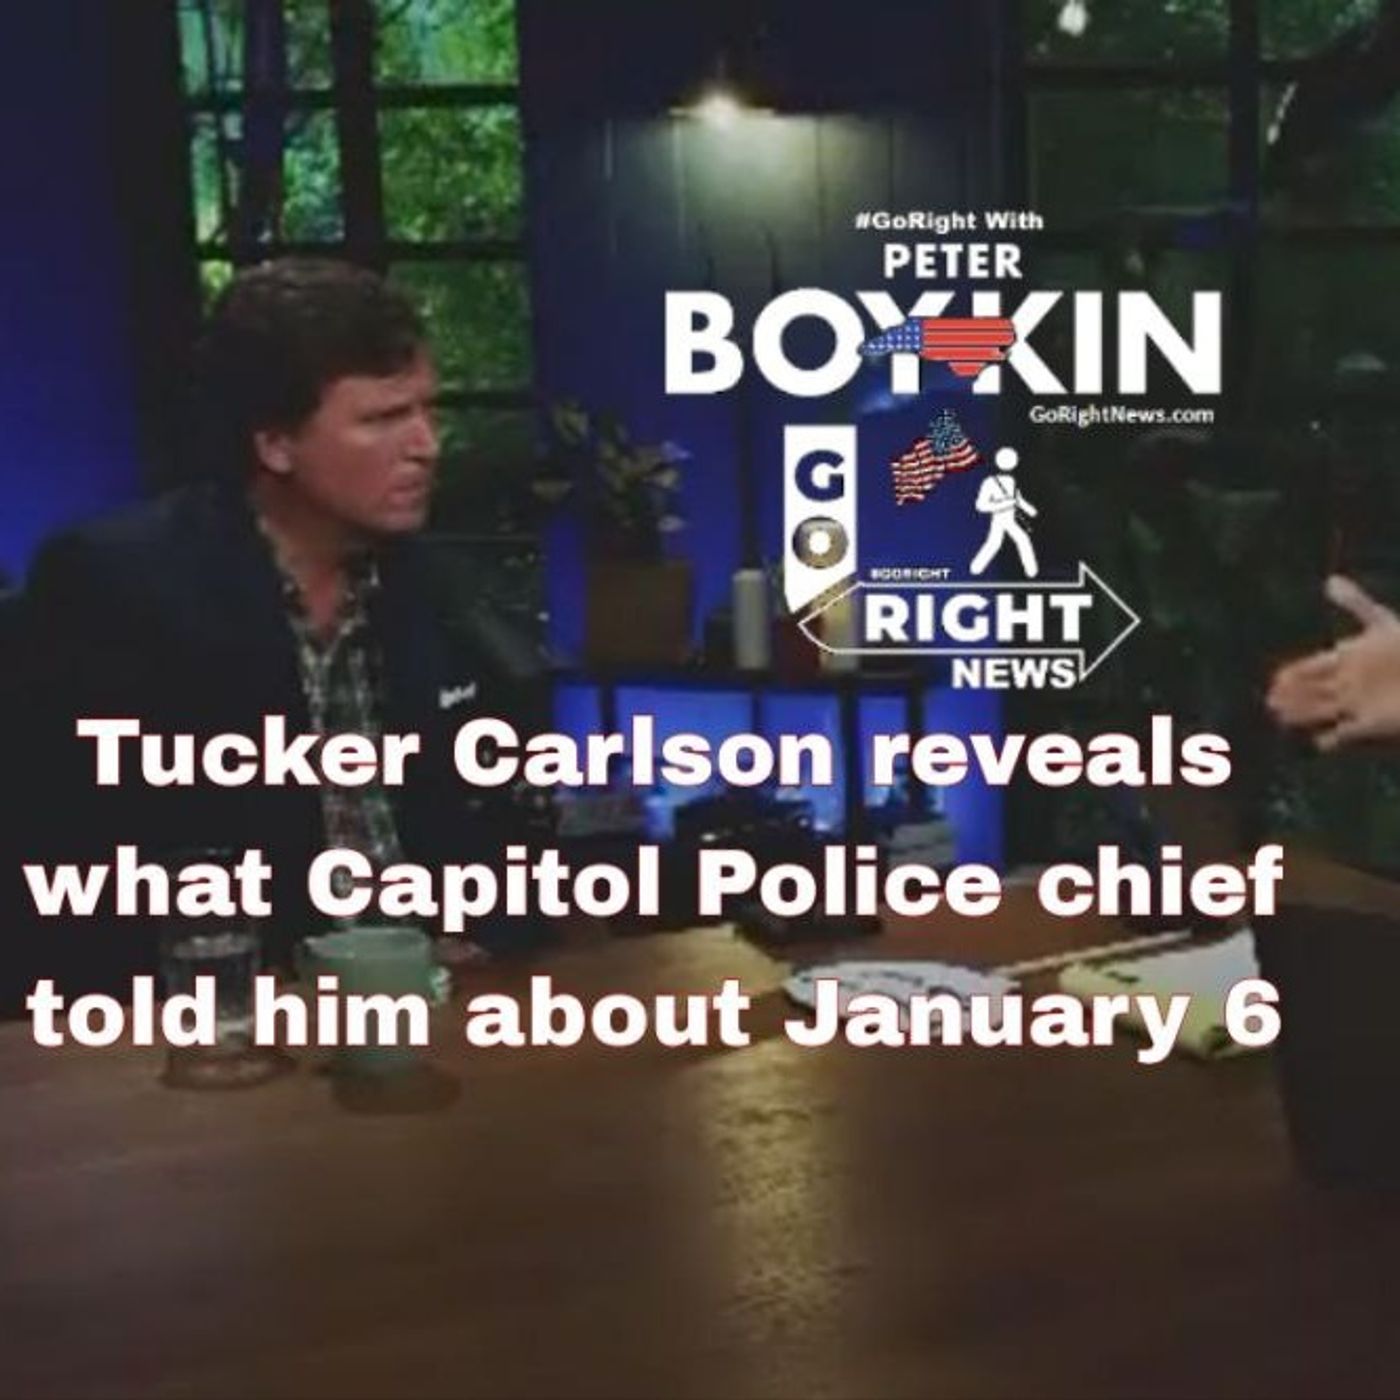 Tucker Carlson Reveals What Capitol Police Chief Told Him About January 6th